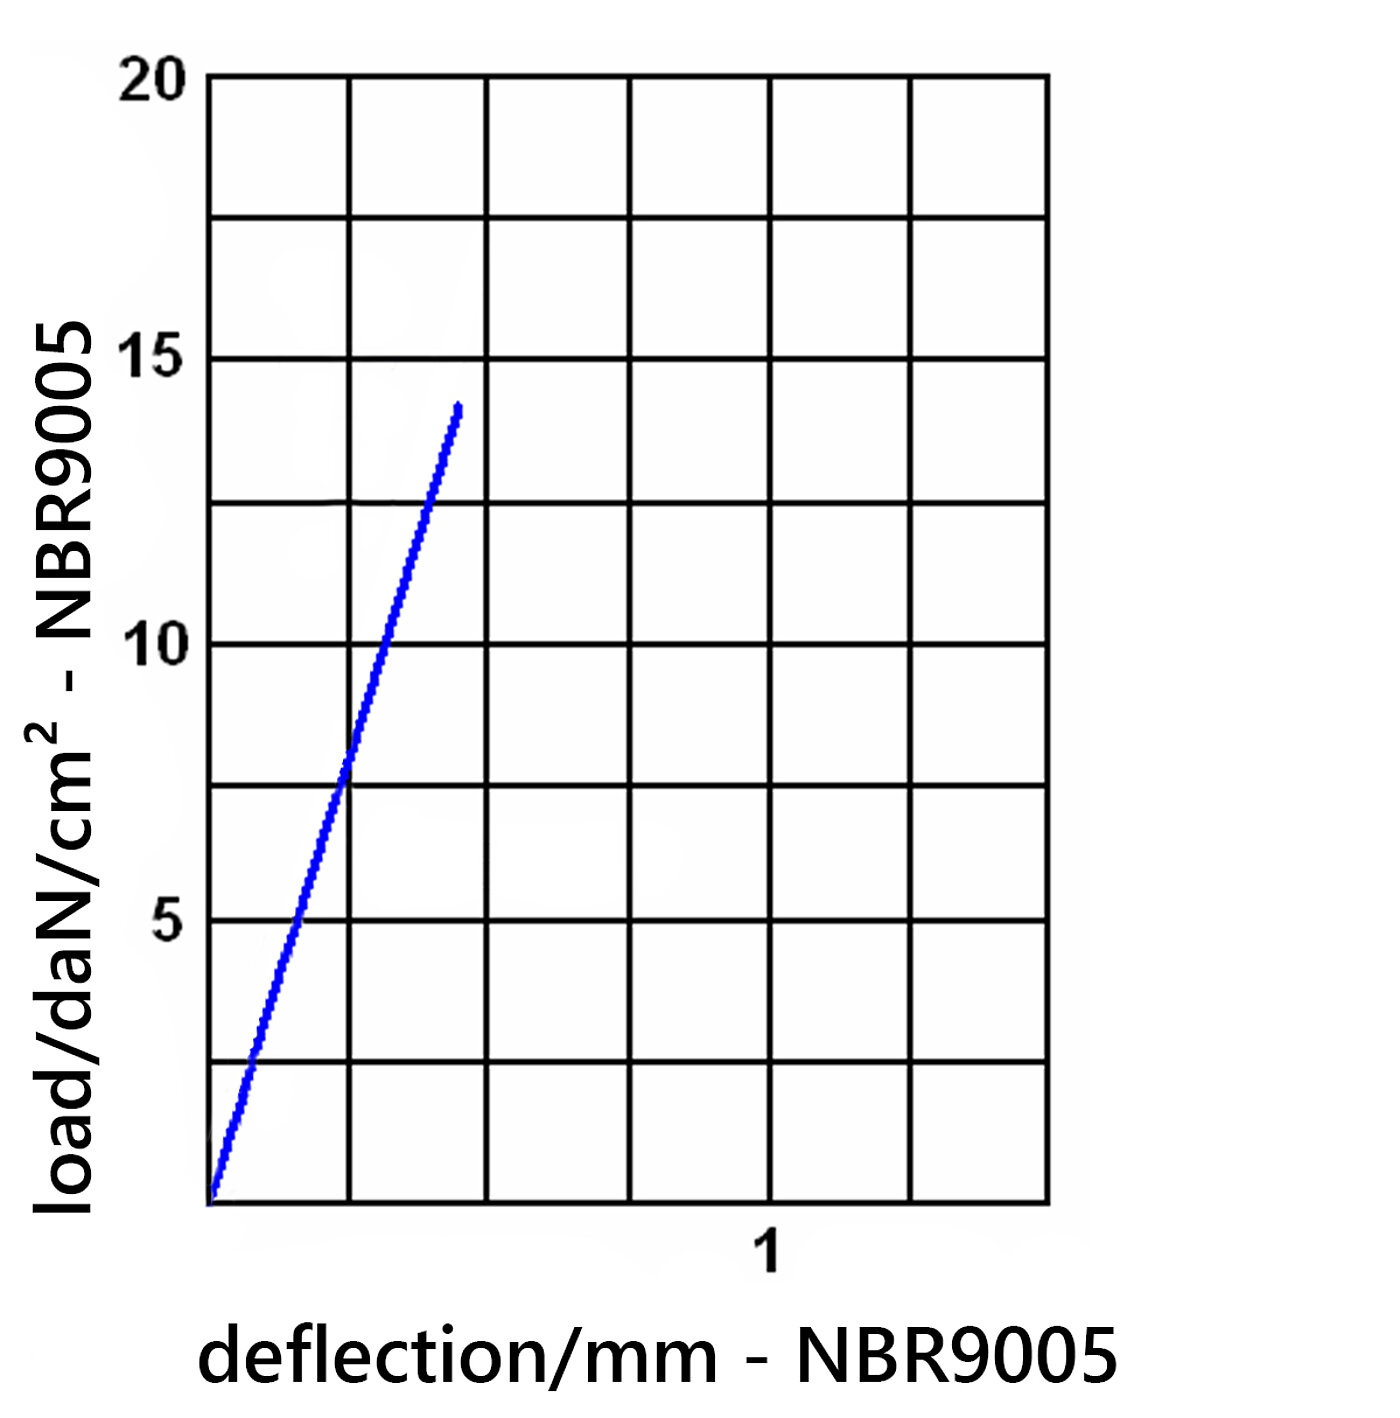 diagramme of the deflection of the elastomer board NBR9005 under load 